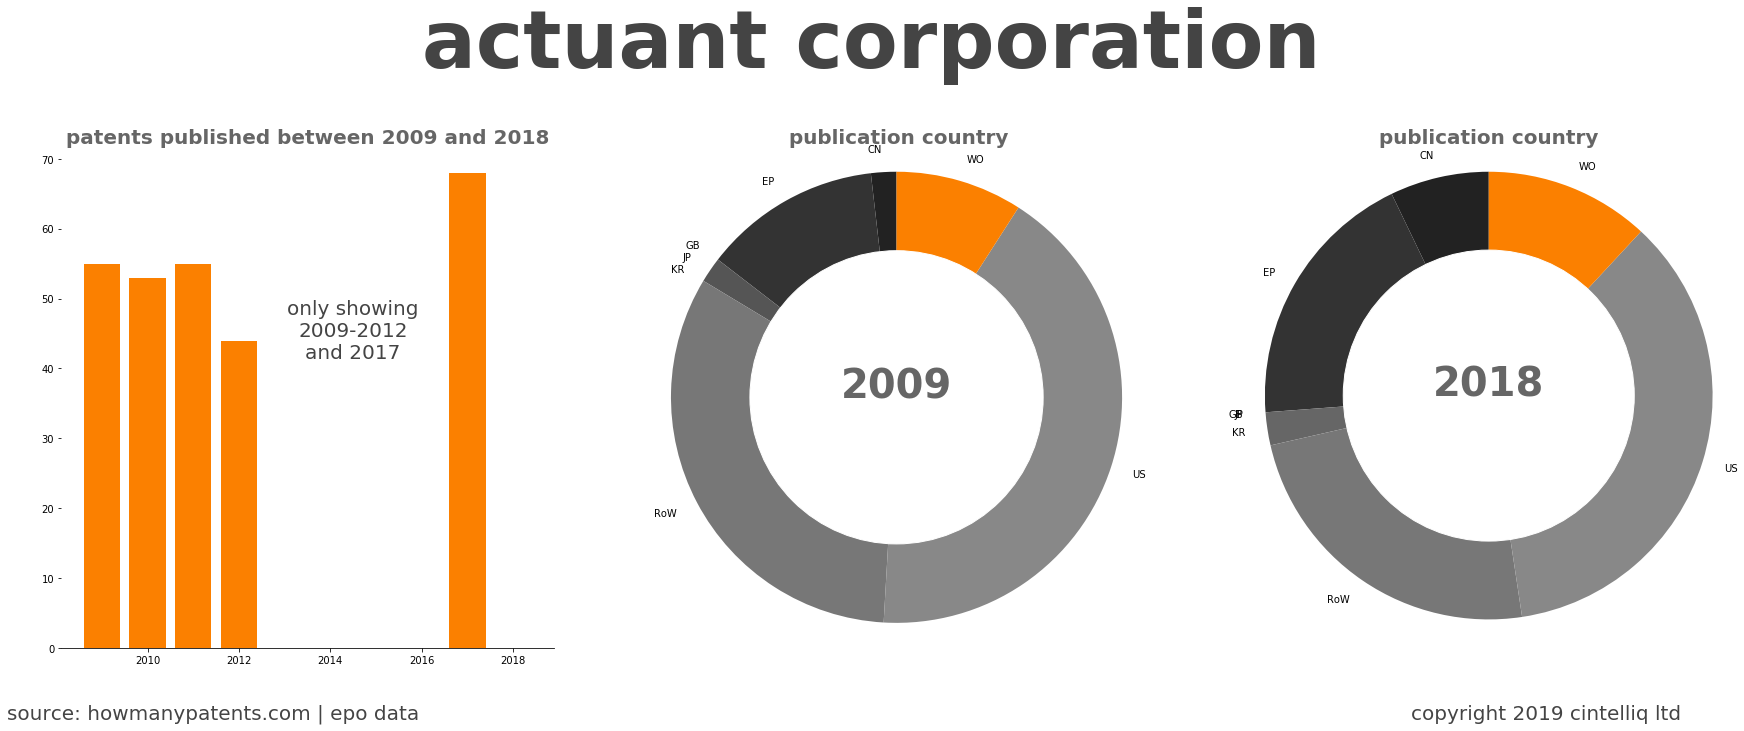 summary of patents for Actuant Corporation